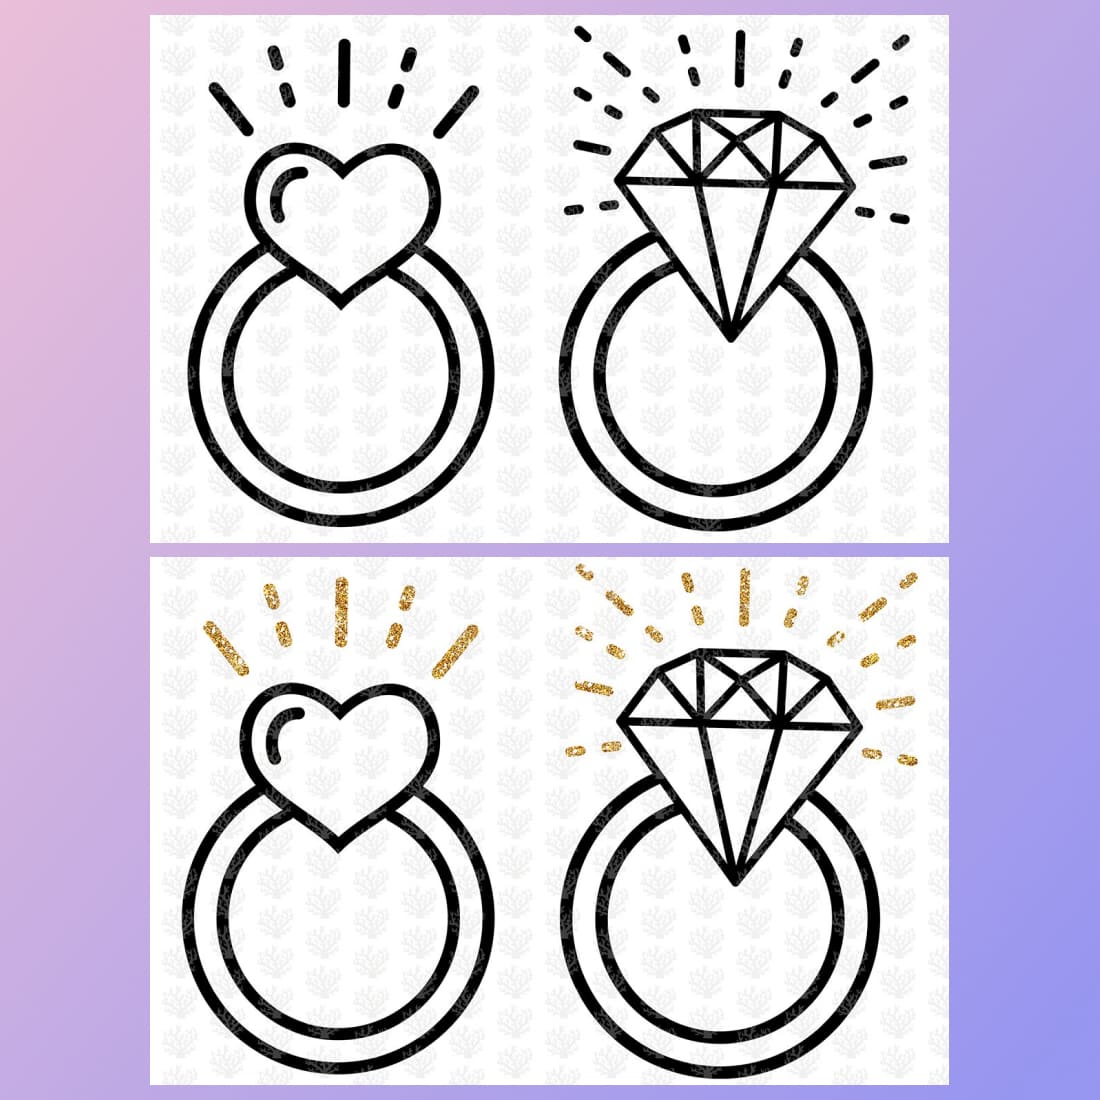 Diamond & Heart Engagement Rings - Svg File cover image.